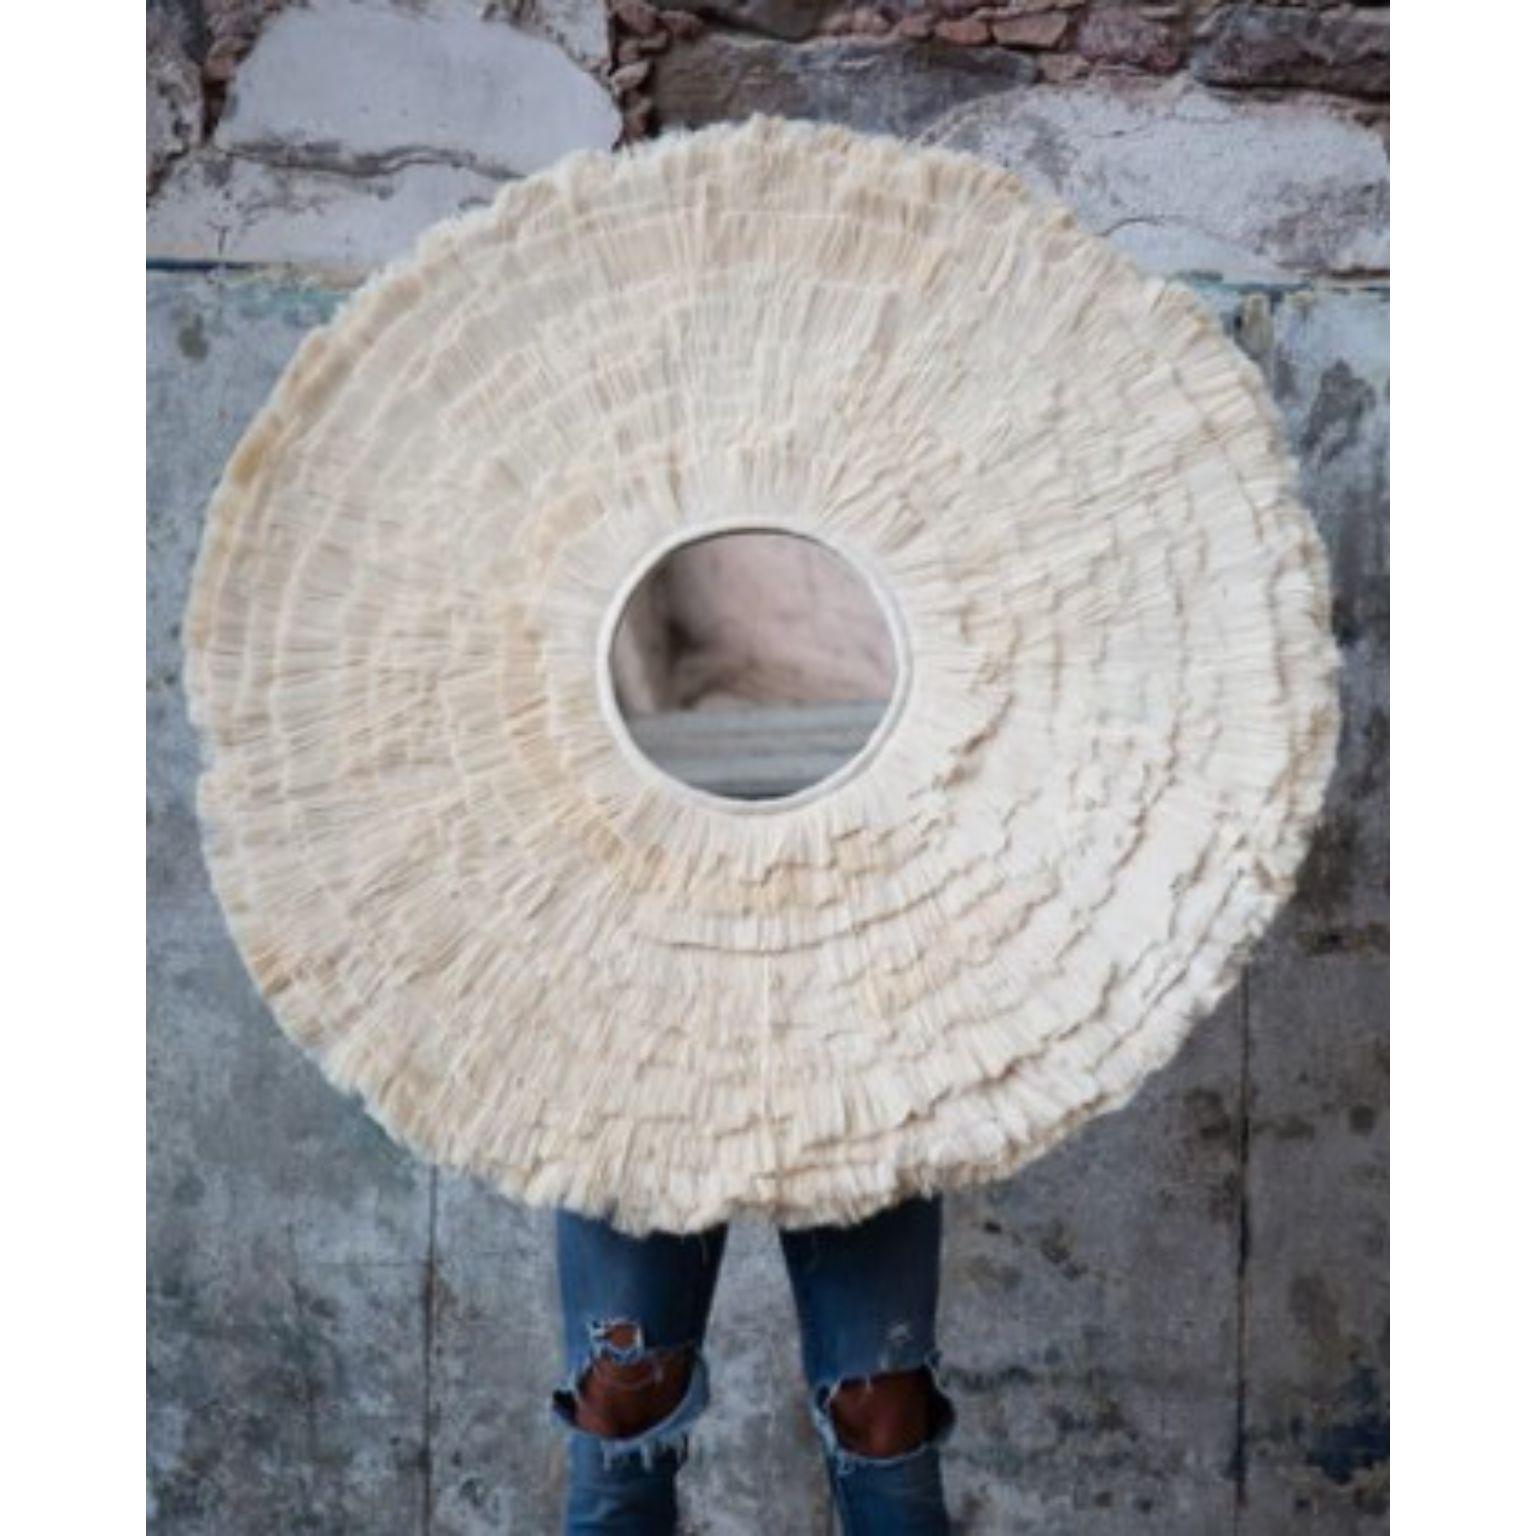 Sol Mirror by Caralarga
Dimensions: D120 x H120 cm
Materials: 100% repurposed raw cotton thread, mdf
base, 100% cotton lining, mirror
handmade

Caralarga is a textile design and production workshop inspired by nature’s raw materials; we seek